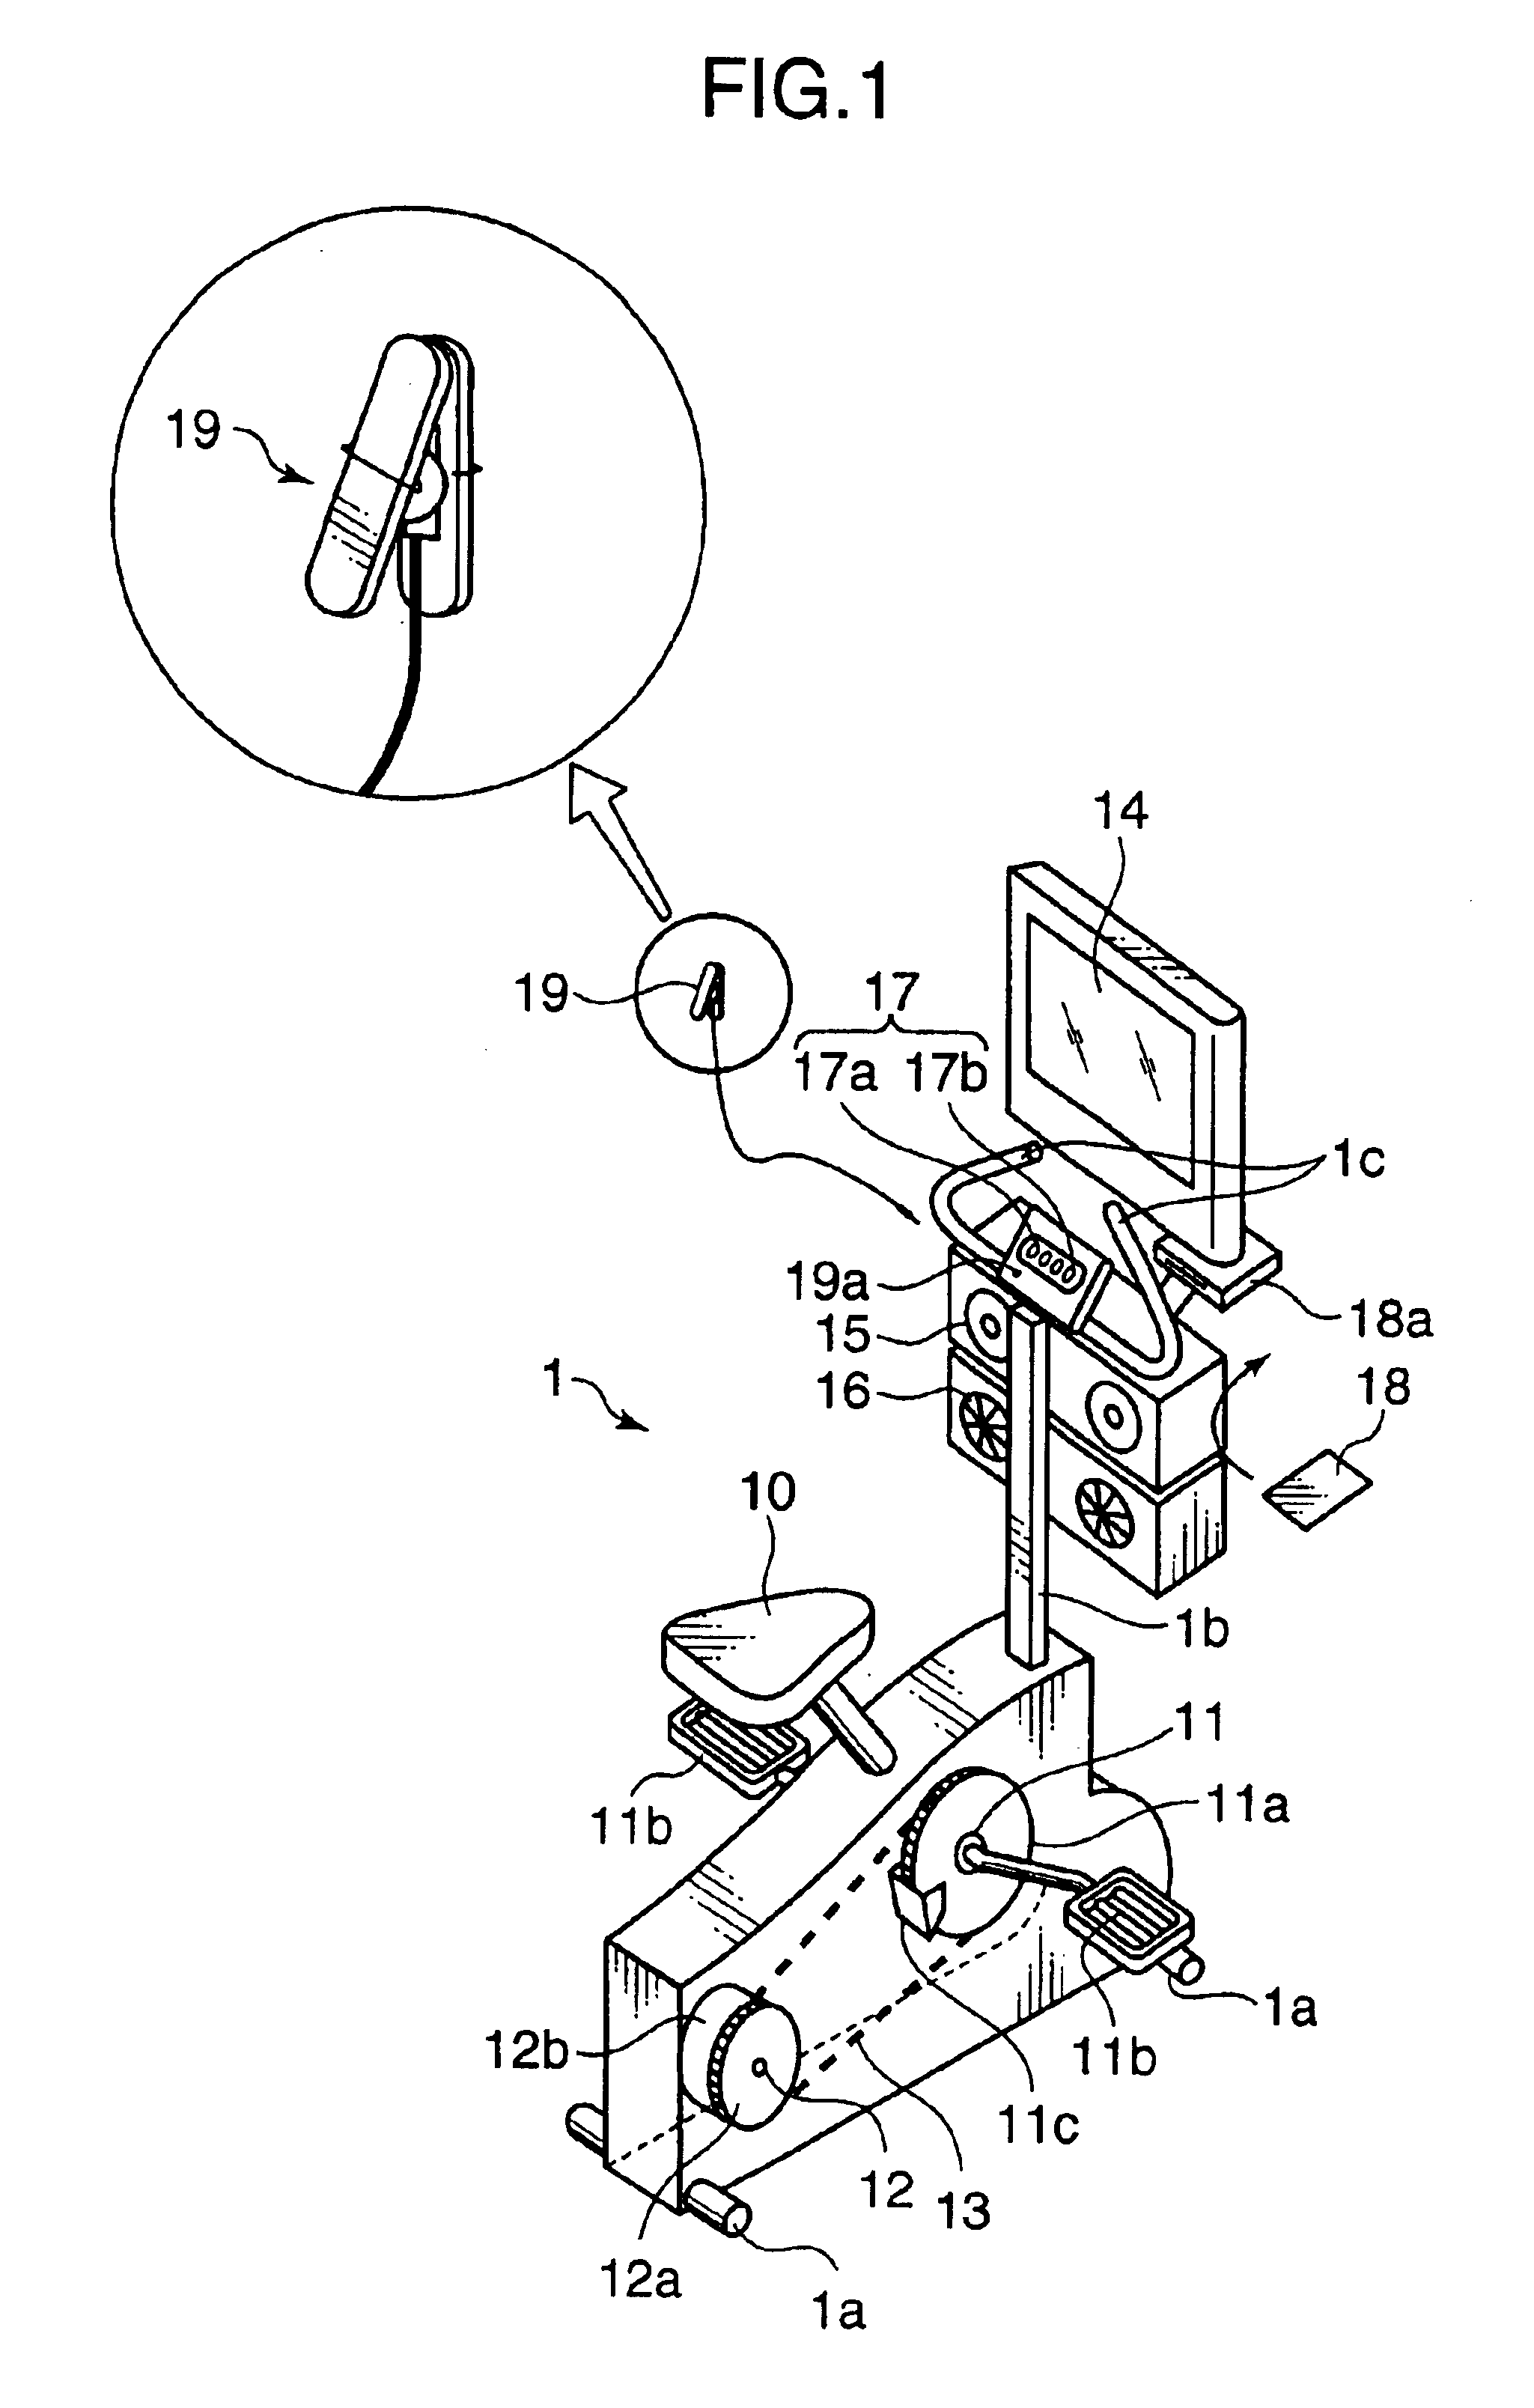 Exercise assisting method and apparatus implementing such method